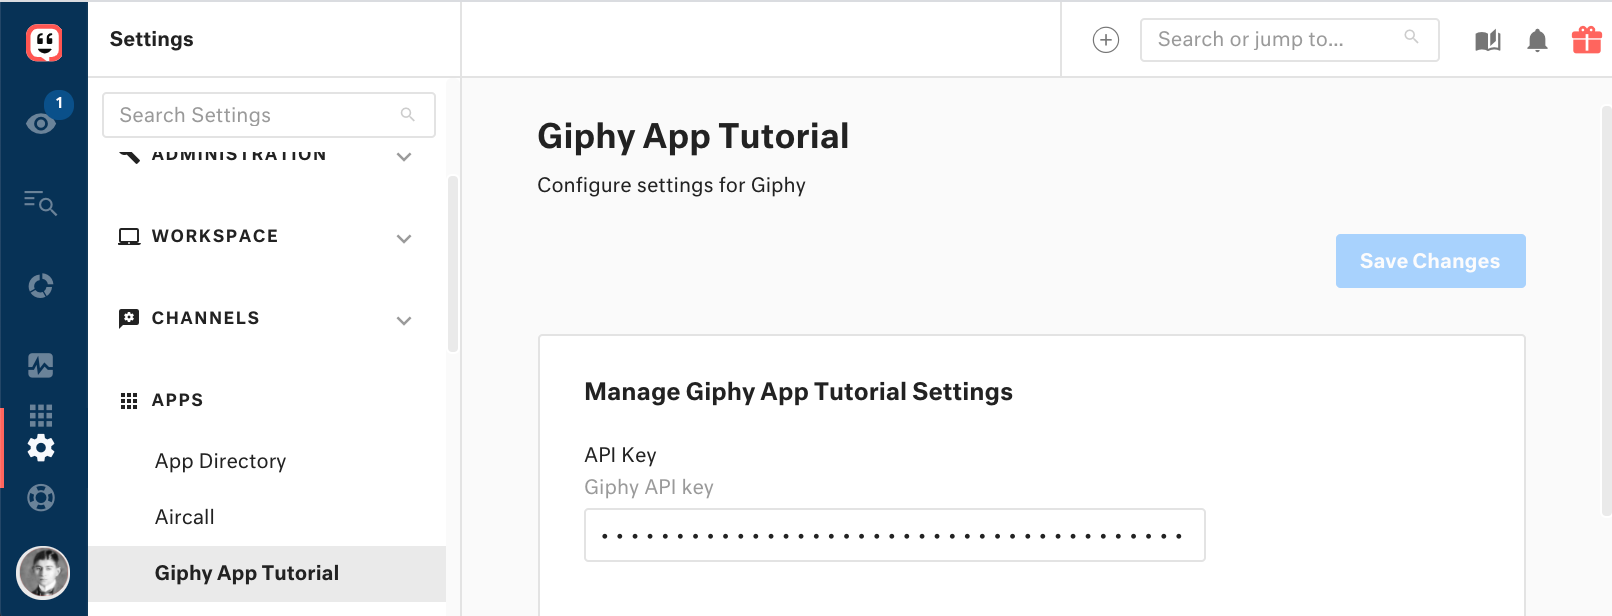 Enter the GIPHY API key in the app settings page.